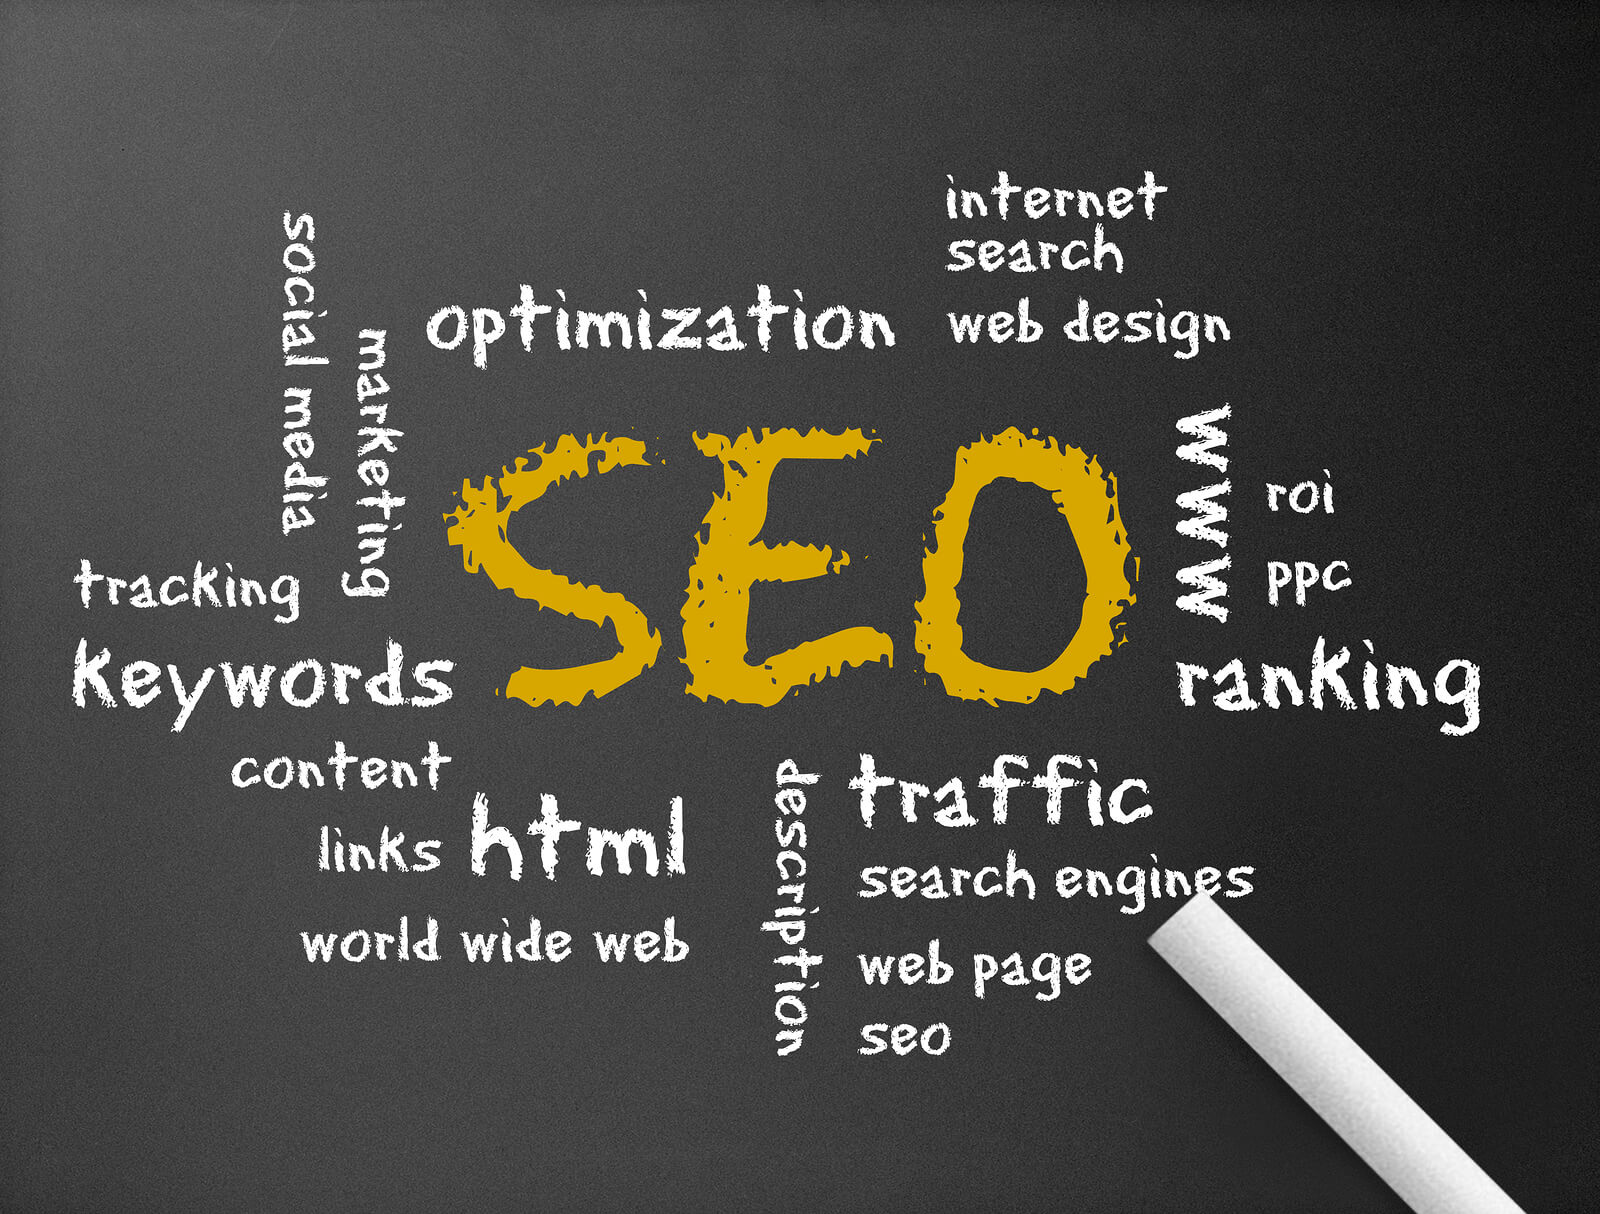 Blogging- Helping Your Website's SEO